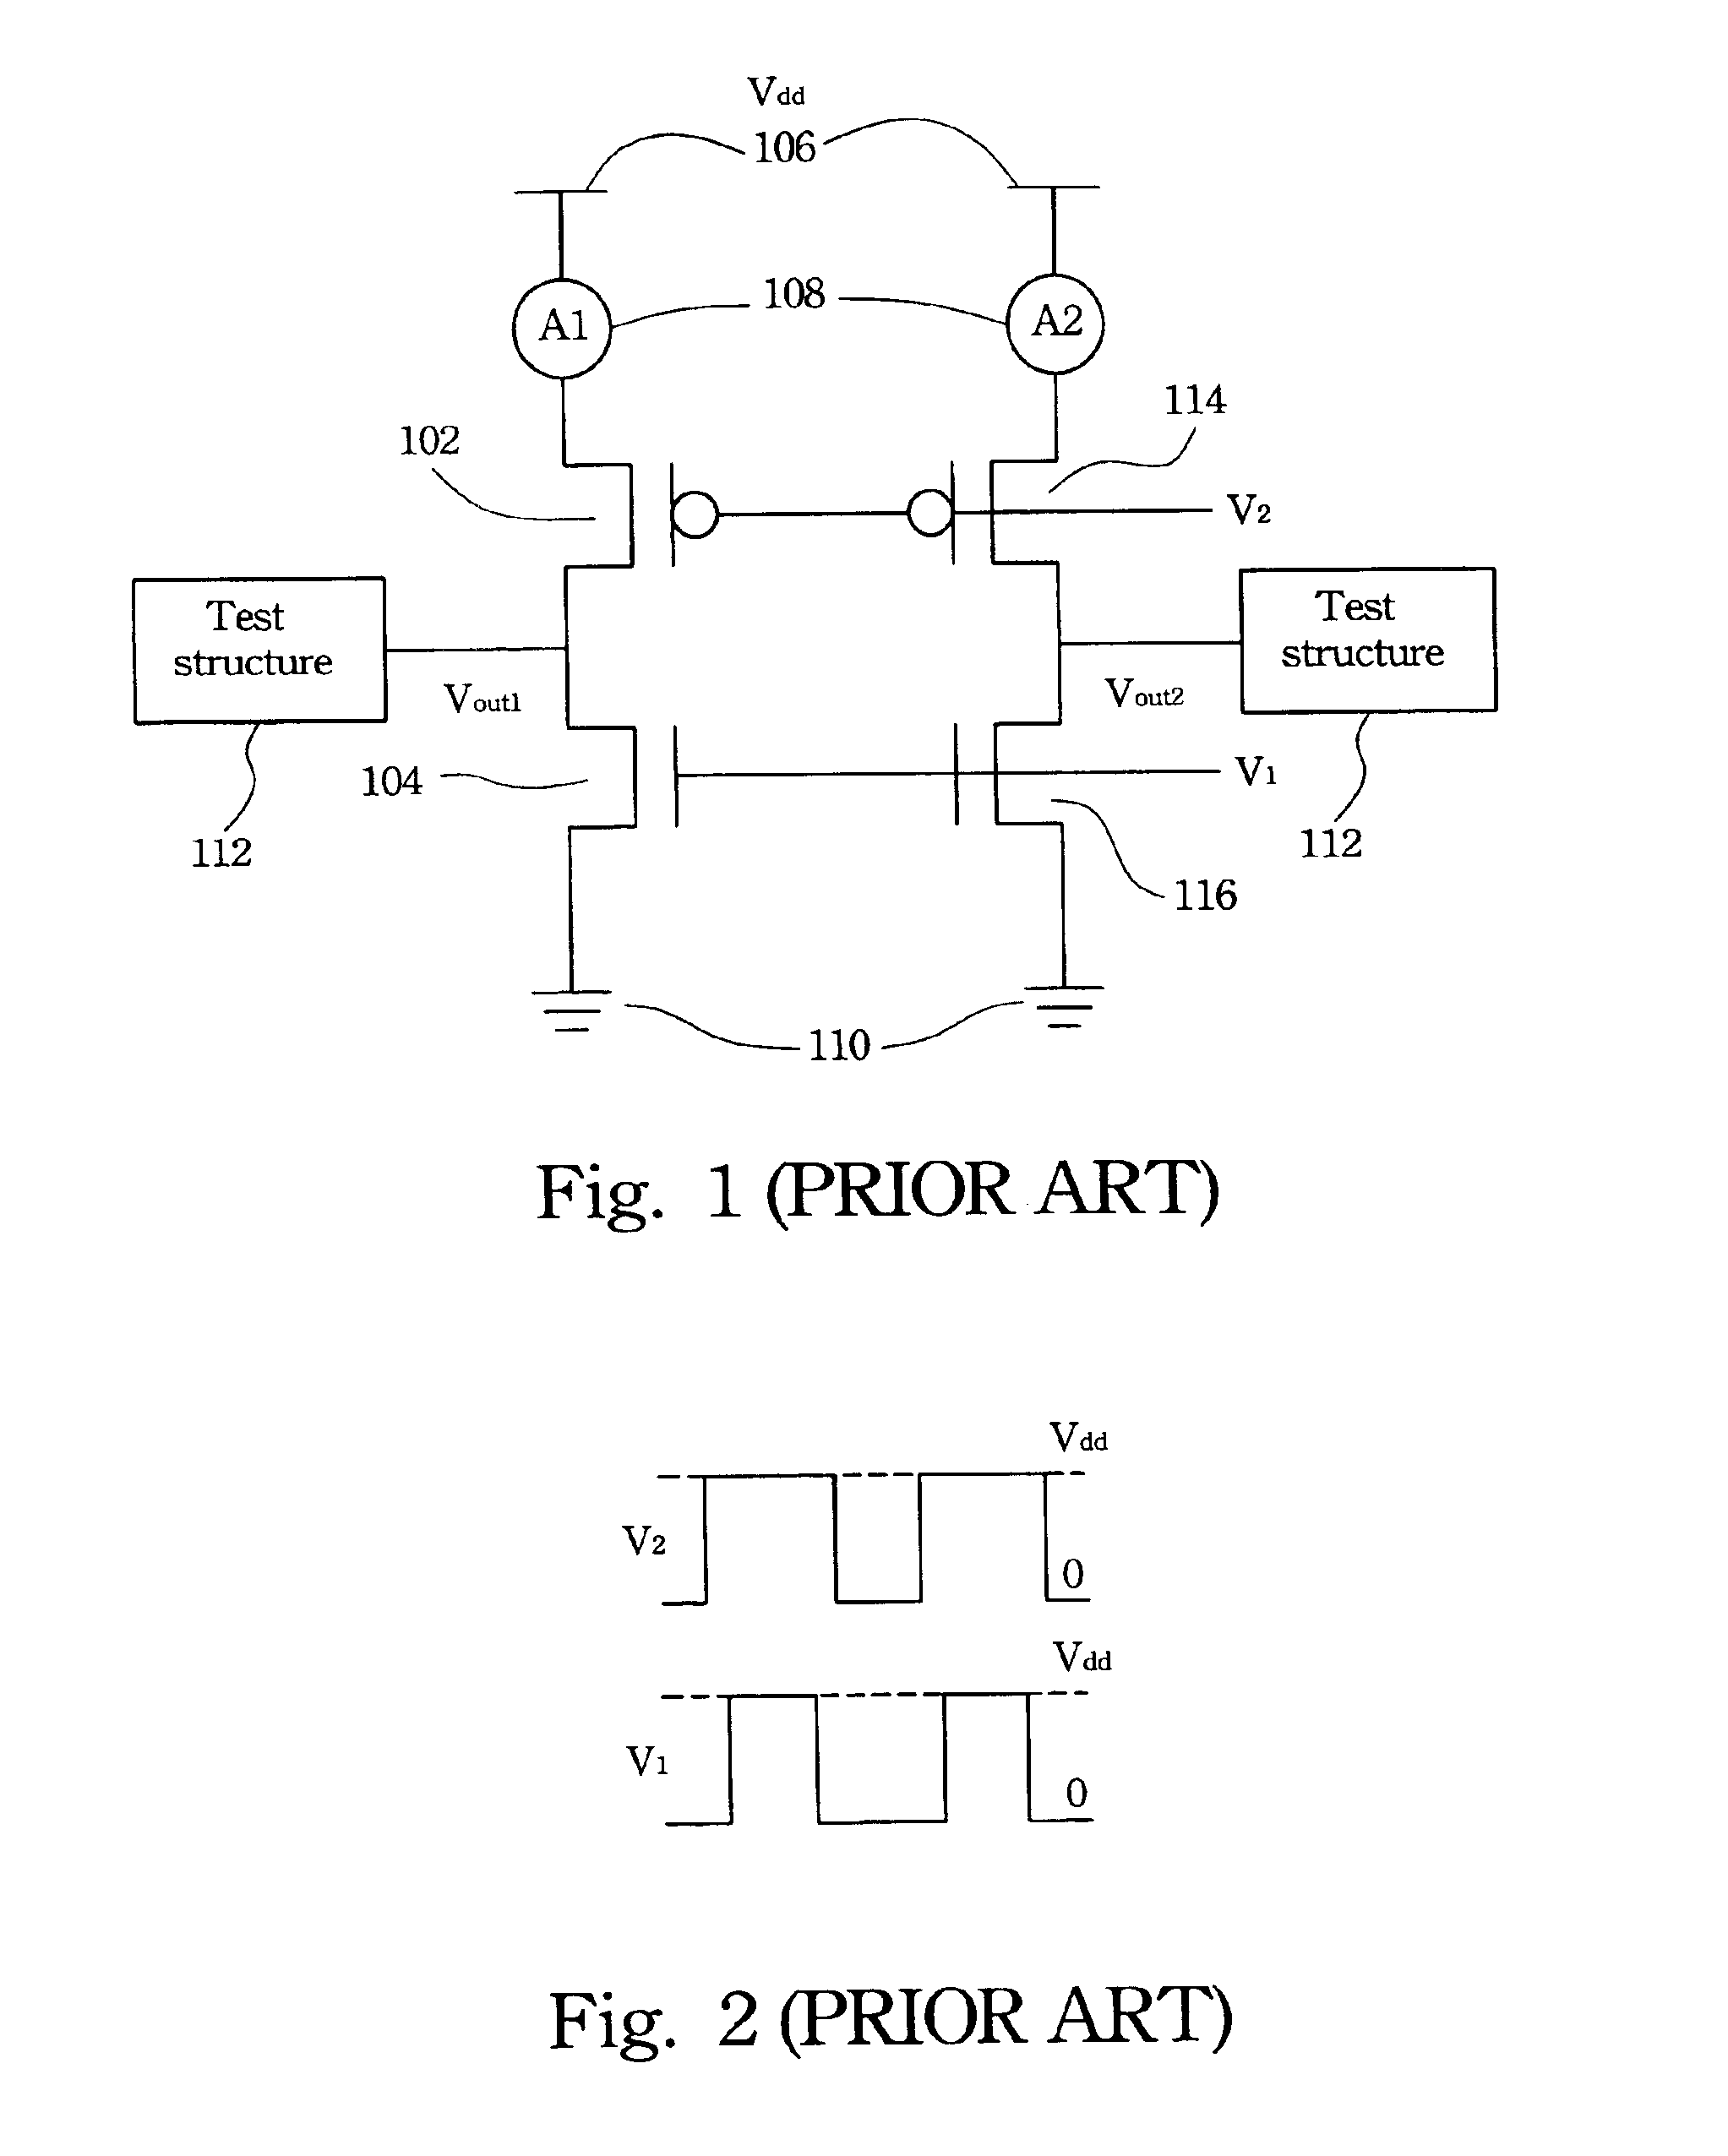 Method and test structures for measuring interconnect coupling capacitance in an IC chip